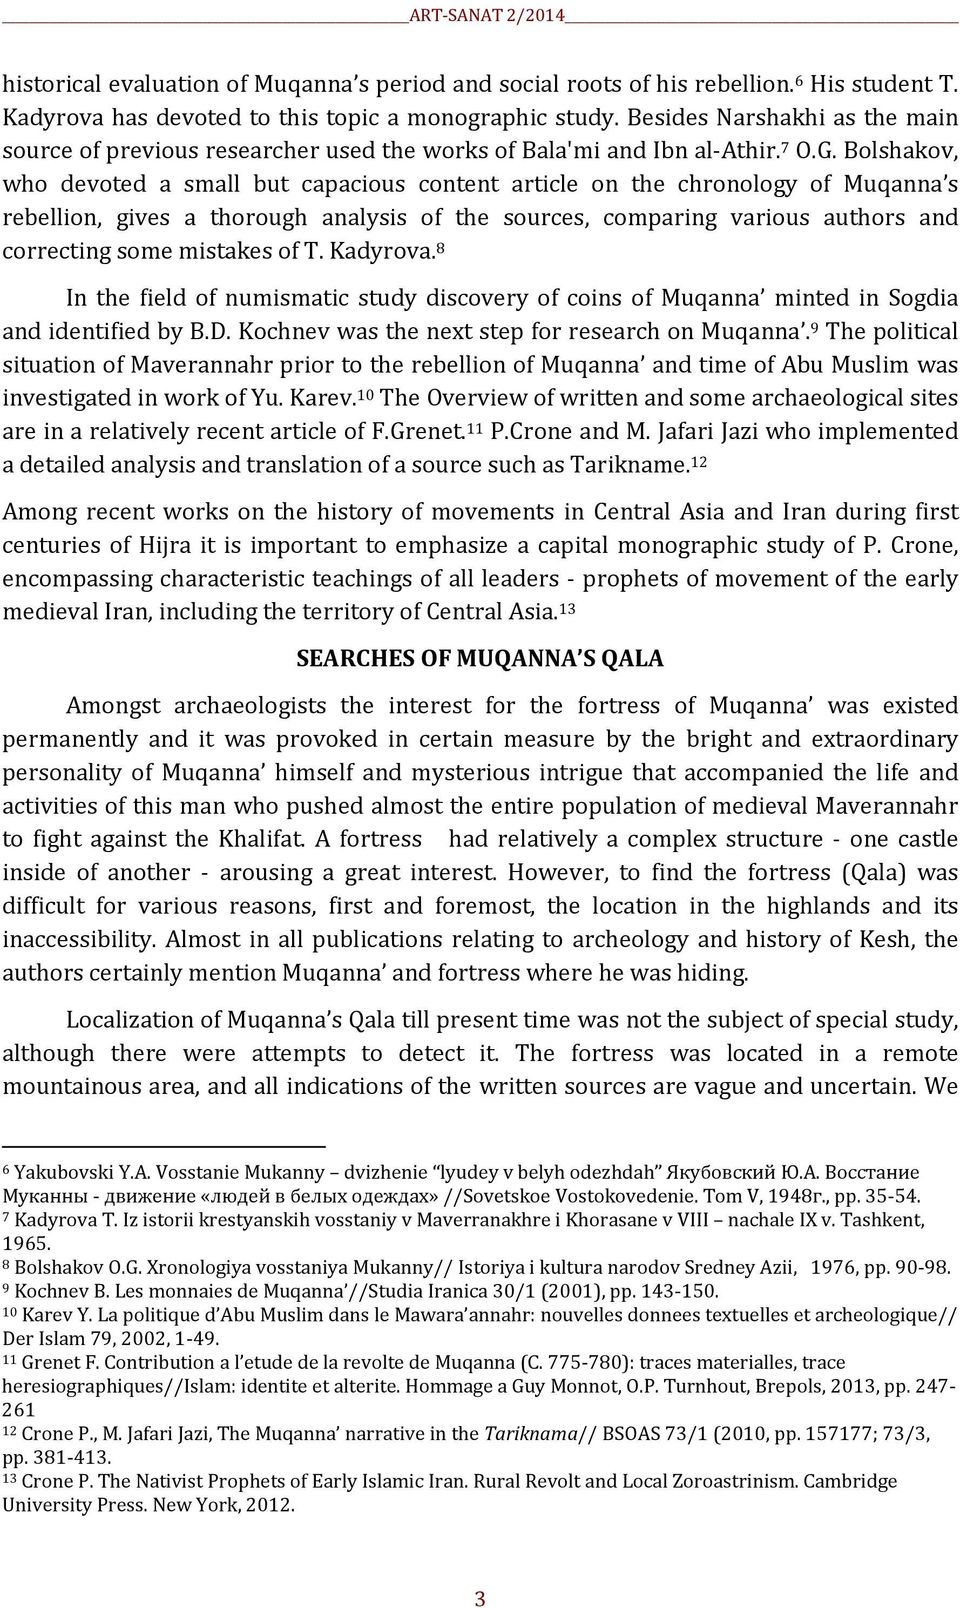 Bolshakov, who devoted a small but capacious content article on the chronology of Muqanna s rebellion, gives a thorough analysis of the sources, comparing various authors and correcting some mistakes